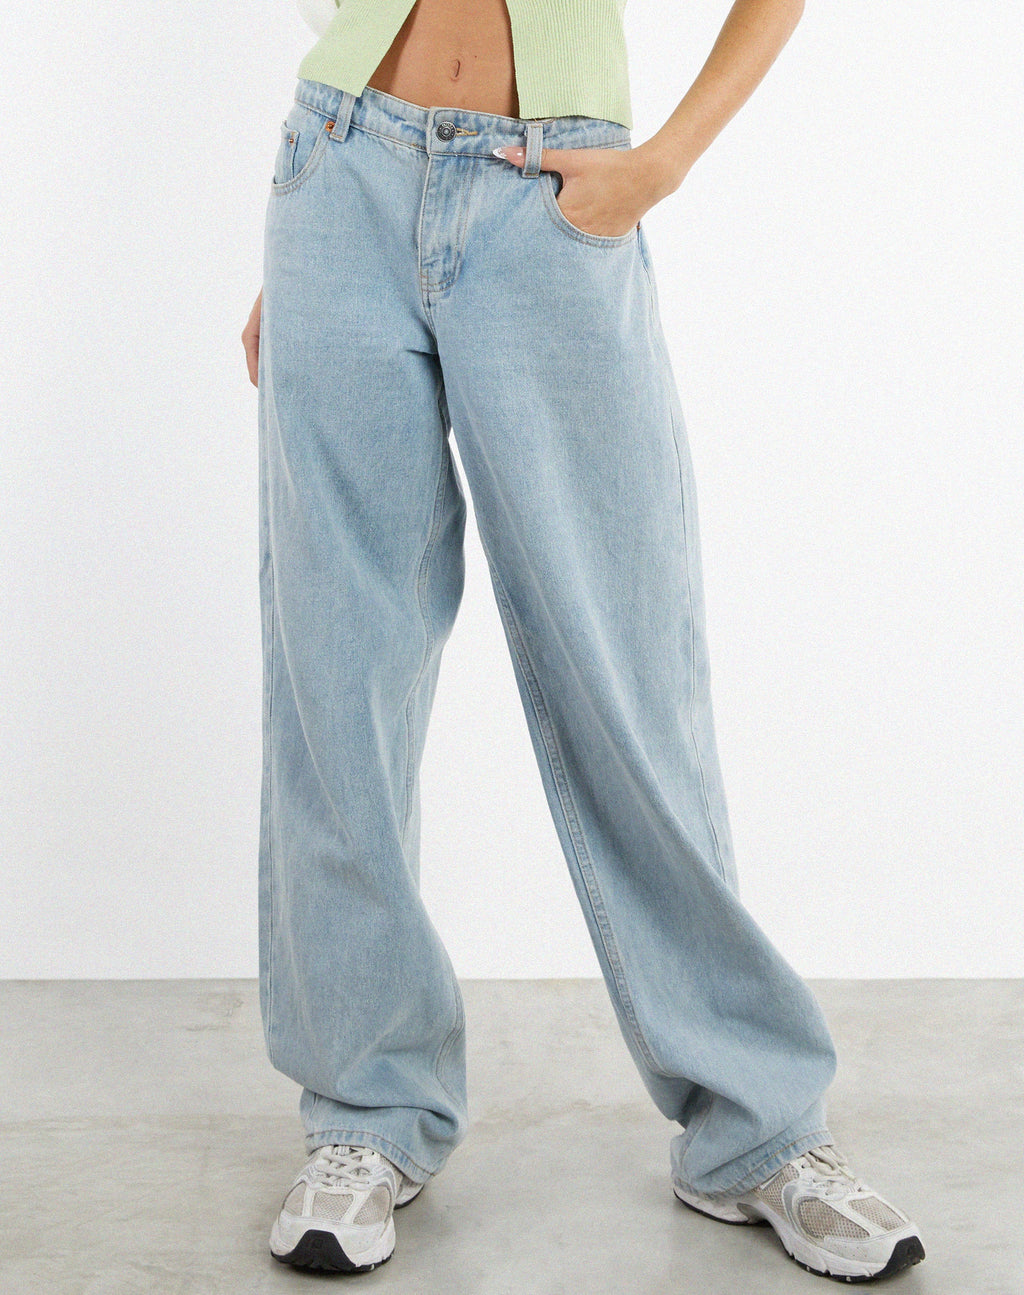 Low Rise Parallel Jeans in Extra Light Wash Blue